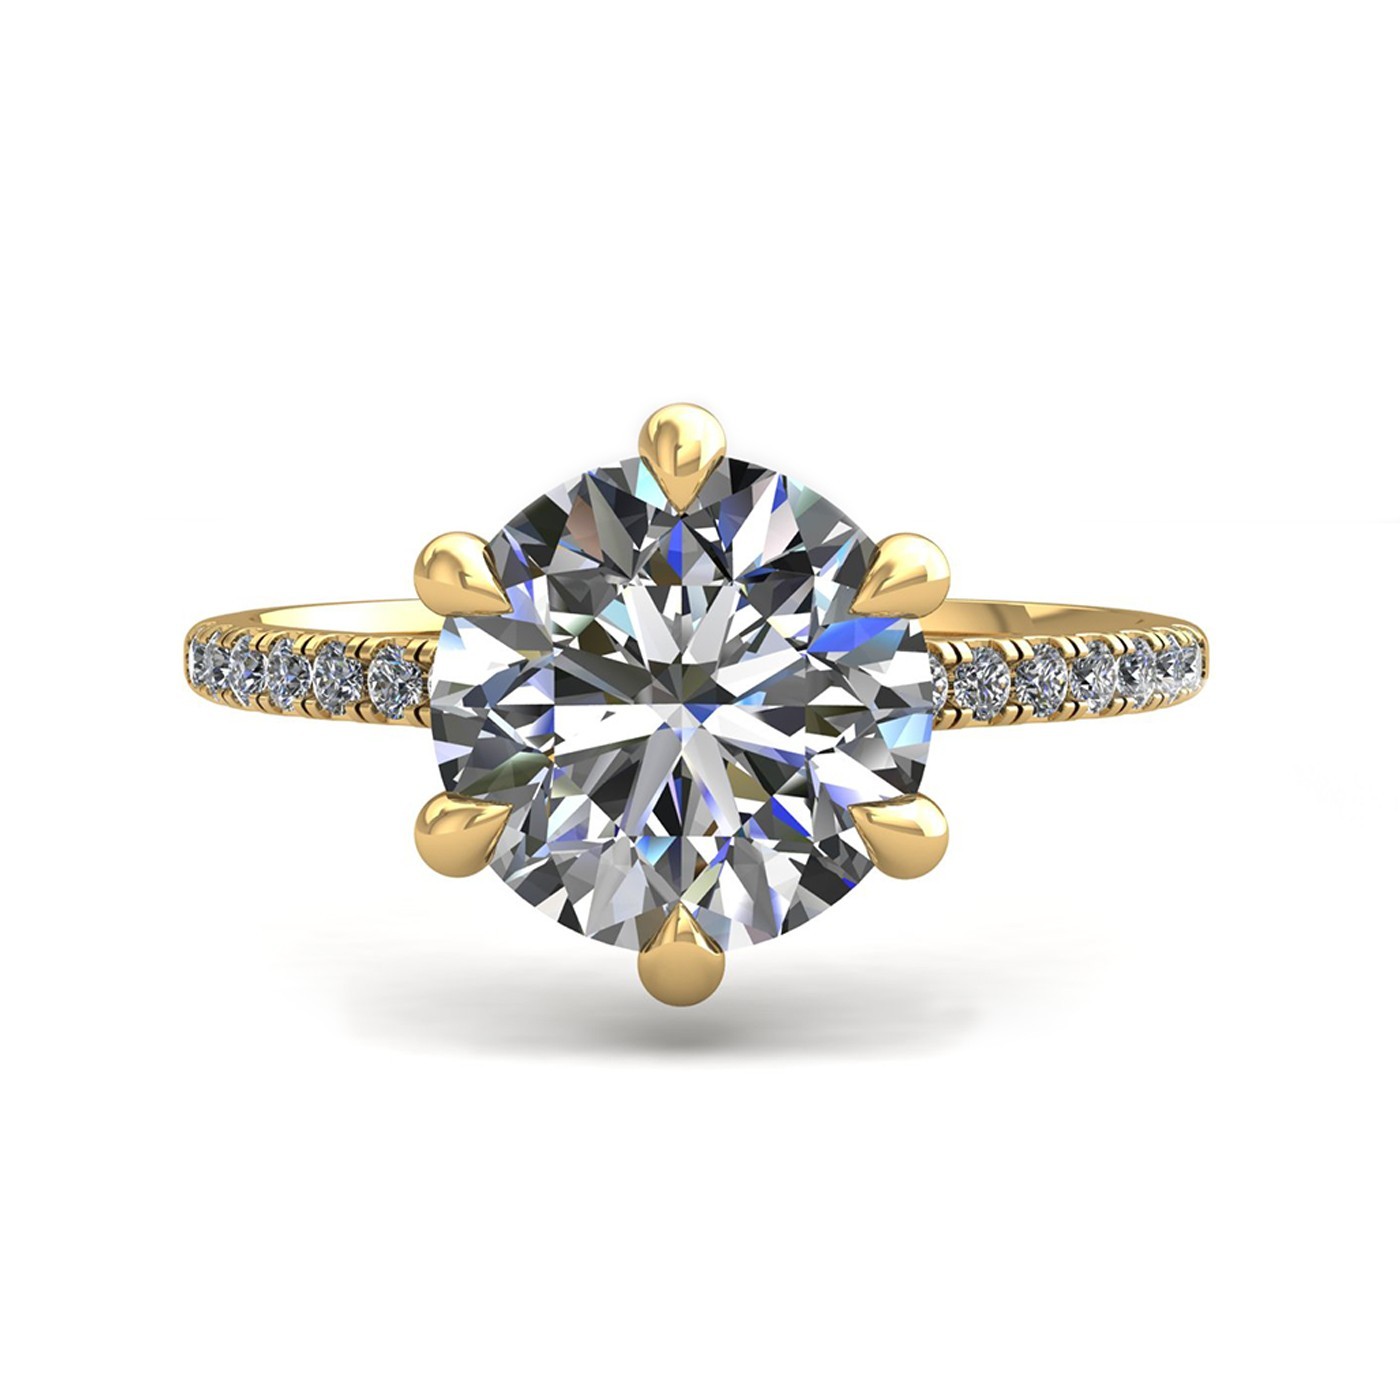 18k yellow gold 1,00 ct 6 prongs round cut diamond engagement ring with whisper thin pavÉ set band Photos & images